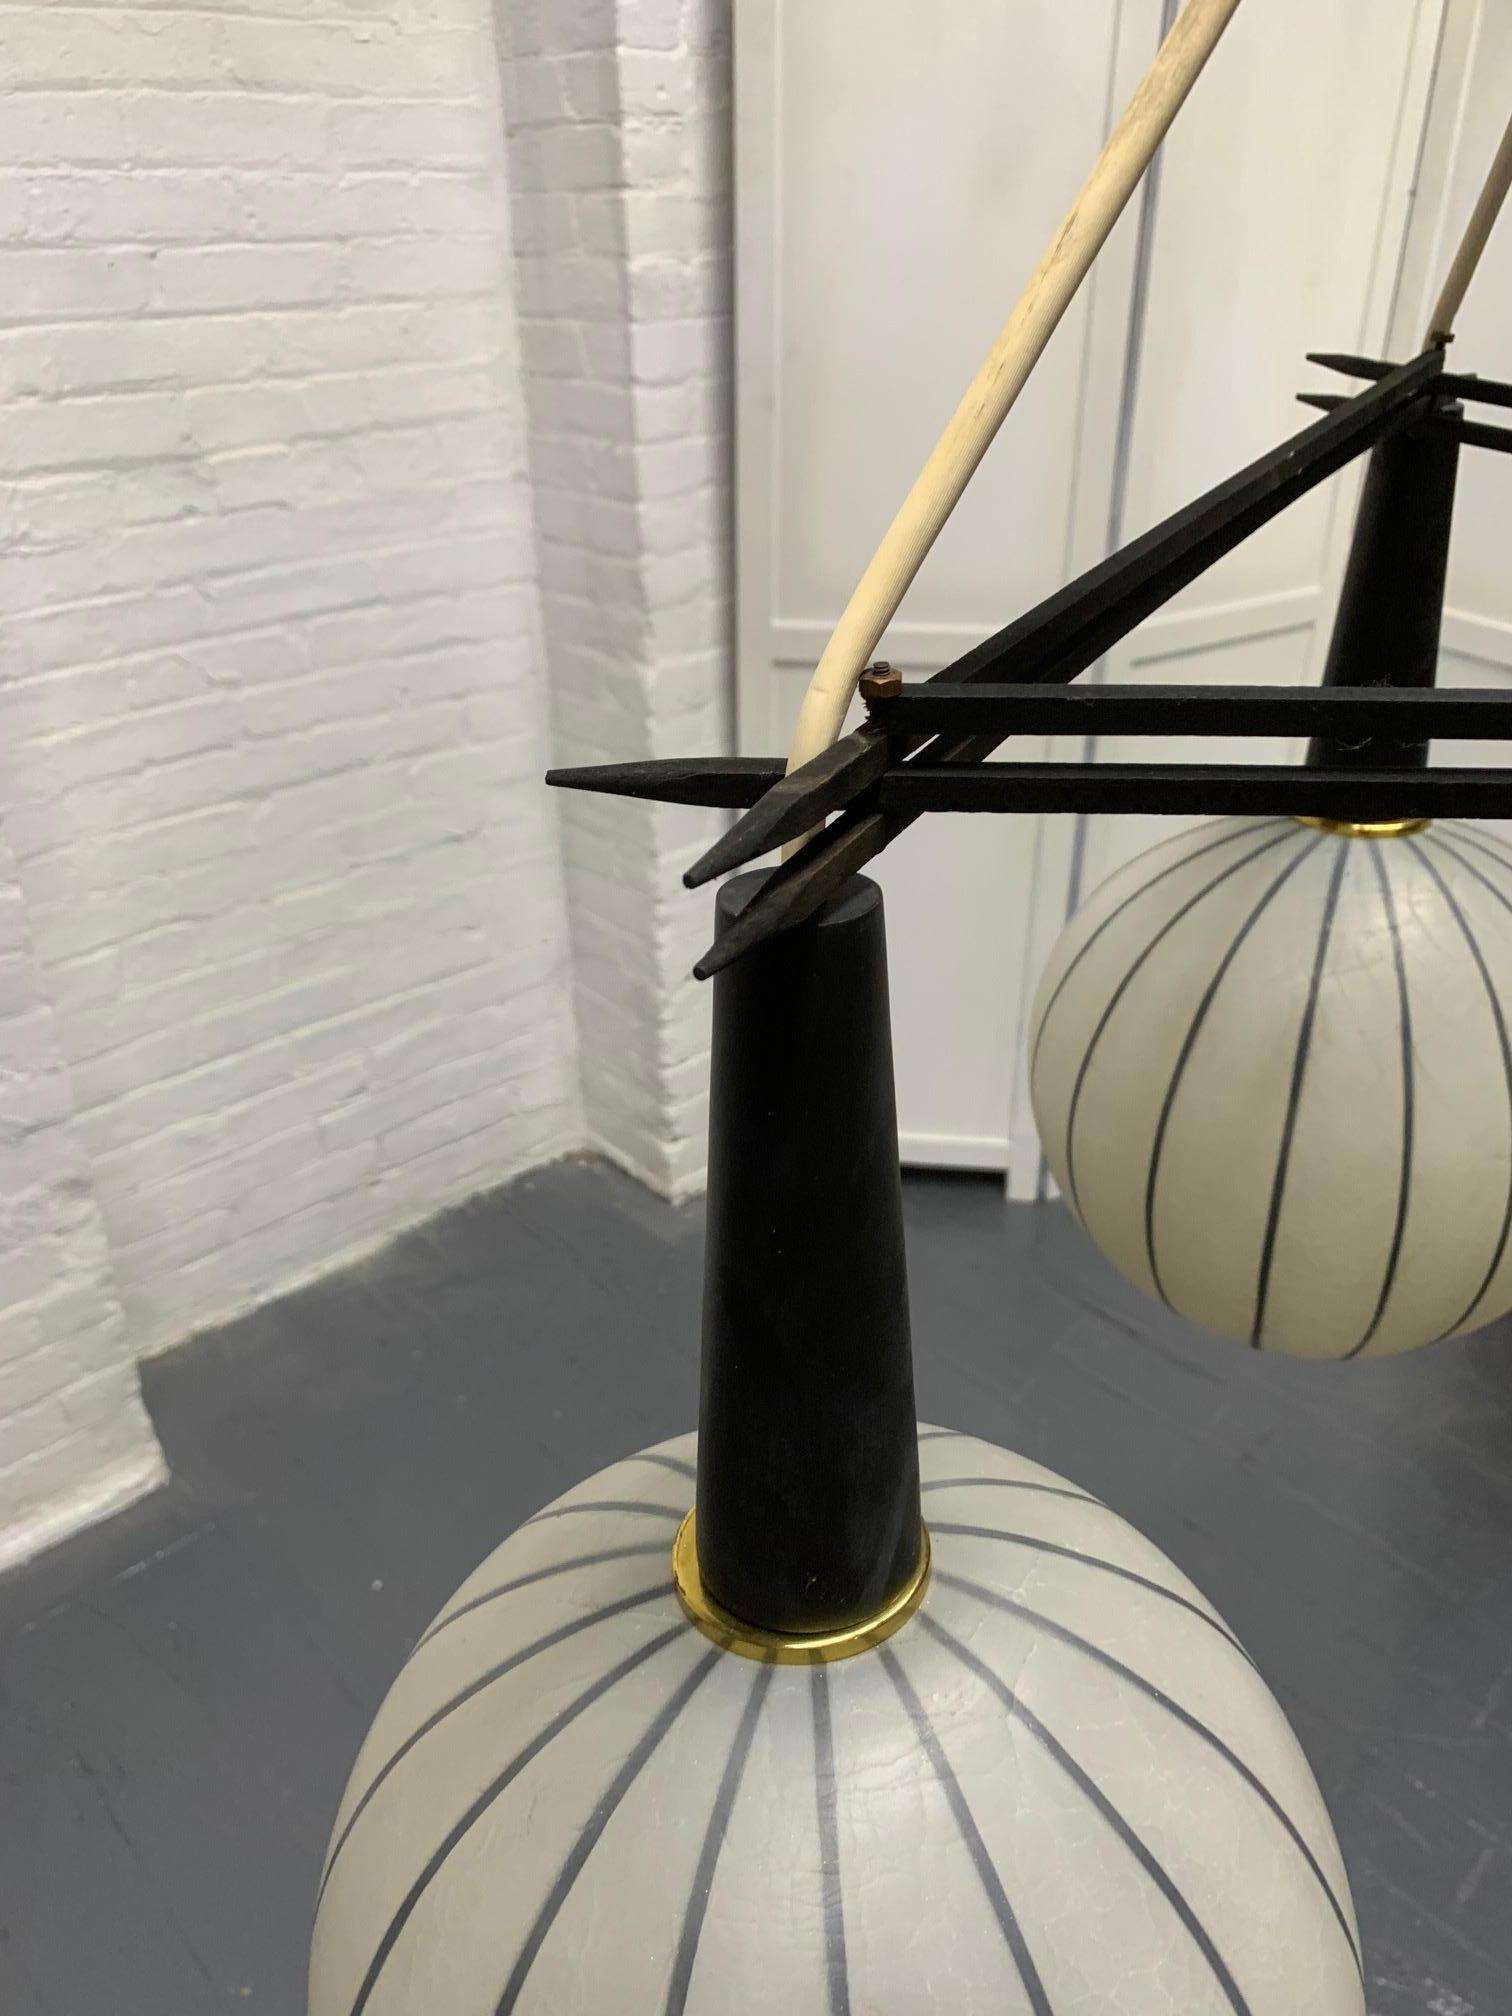 1960s three-globe pendant light fixture. Three large glass globes with a striped pattern supported by a wood stem and a triangular wood rod. 

Measures: Overall 29.25 height x 25.5 in diameter. Each globe: 9.5 in diameter x 9 height.